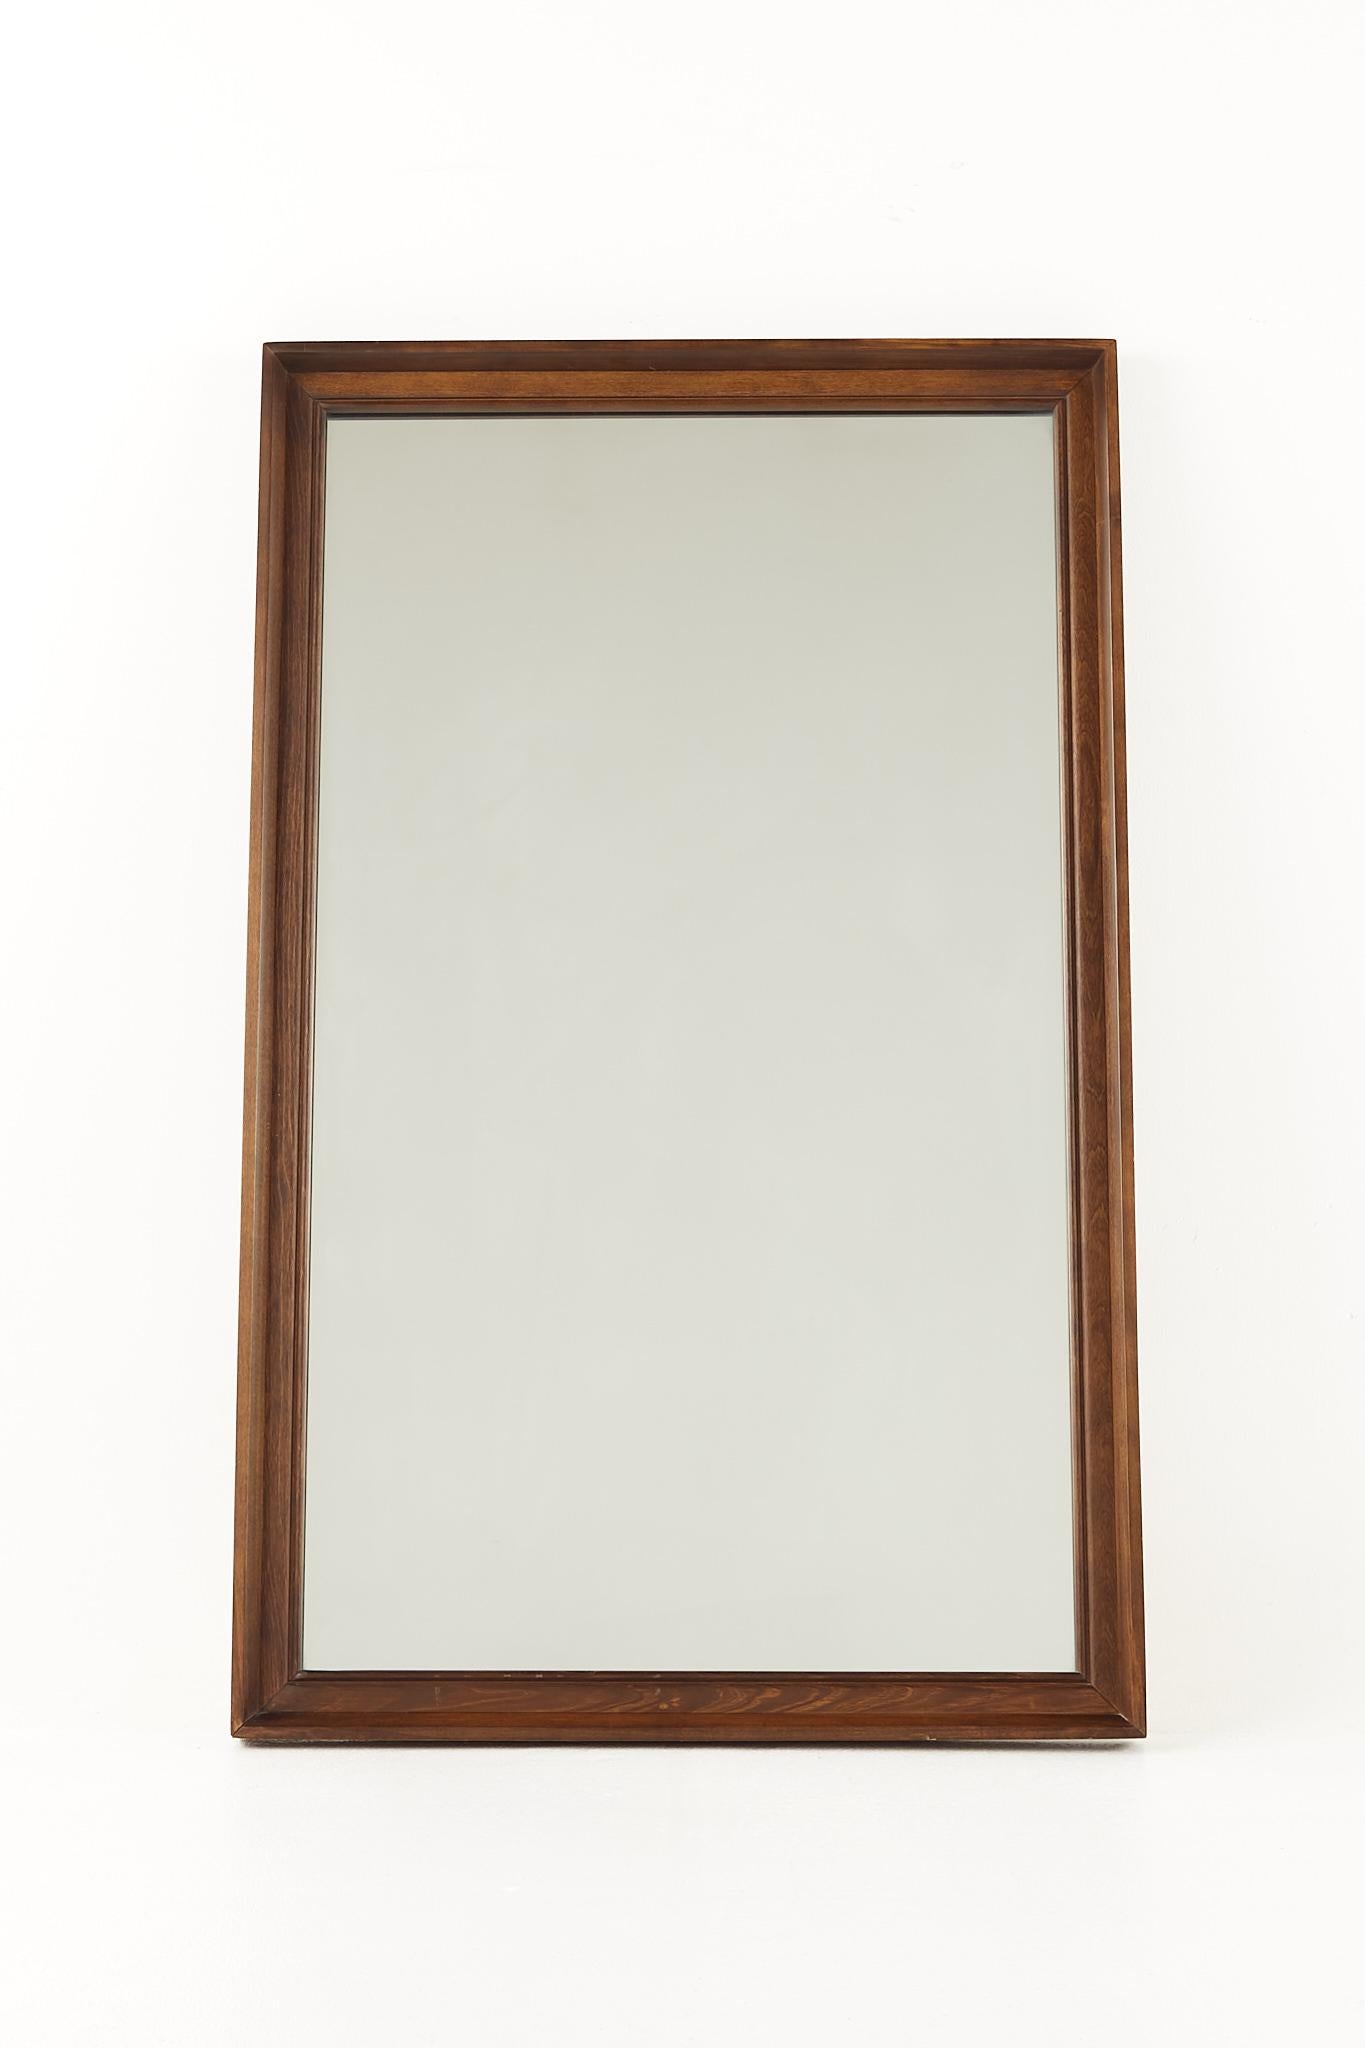 Mid century walnut wall mirror 

This mirror measures: 27 wide x 2 deep x 44 inches high

All pieces of furniture can be had in what we call restored vintage condition. That means the piece is restored upon purchase so it’s free of watermarks,